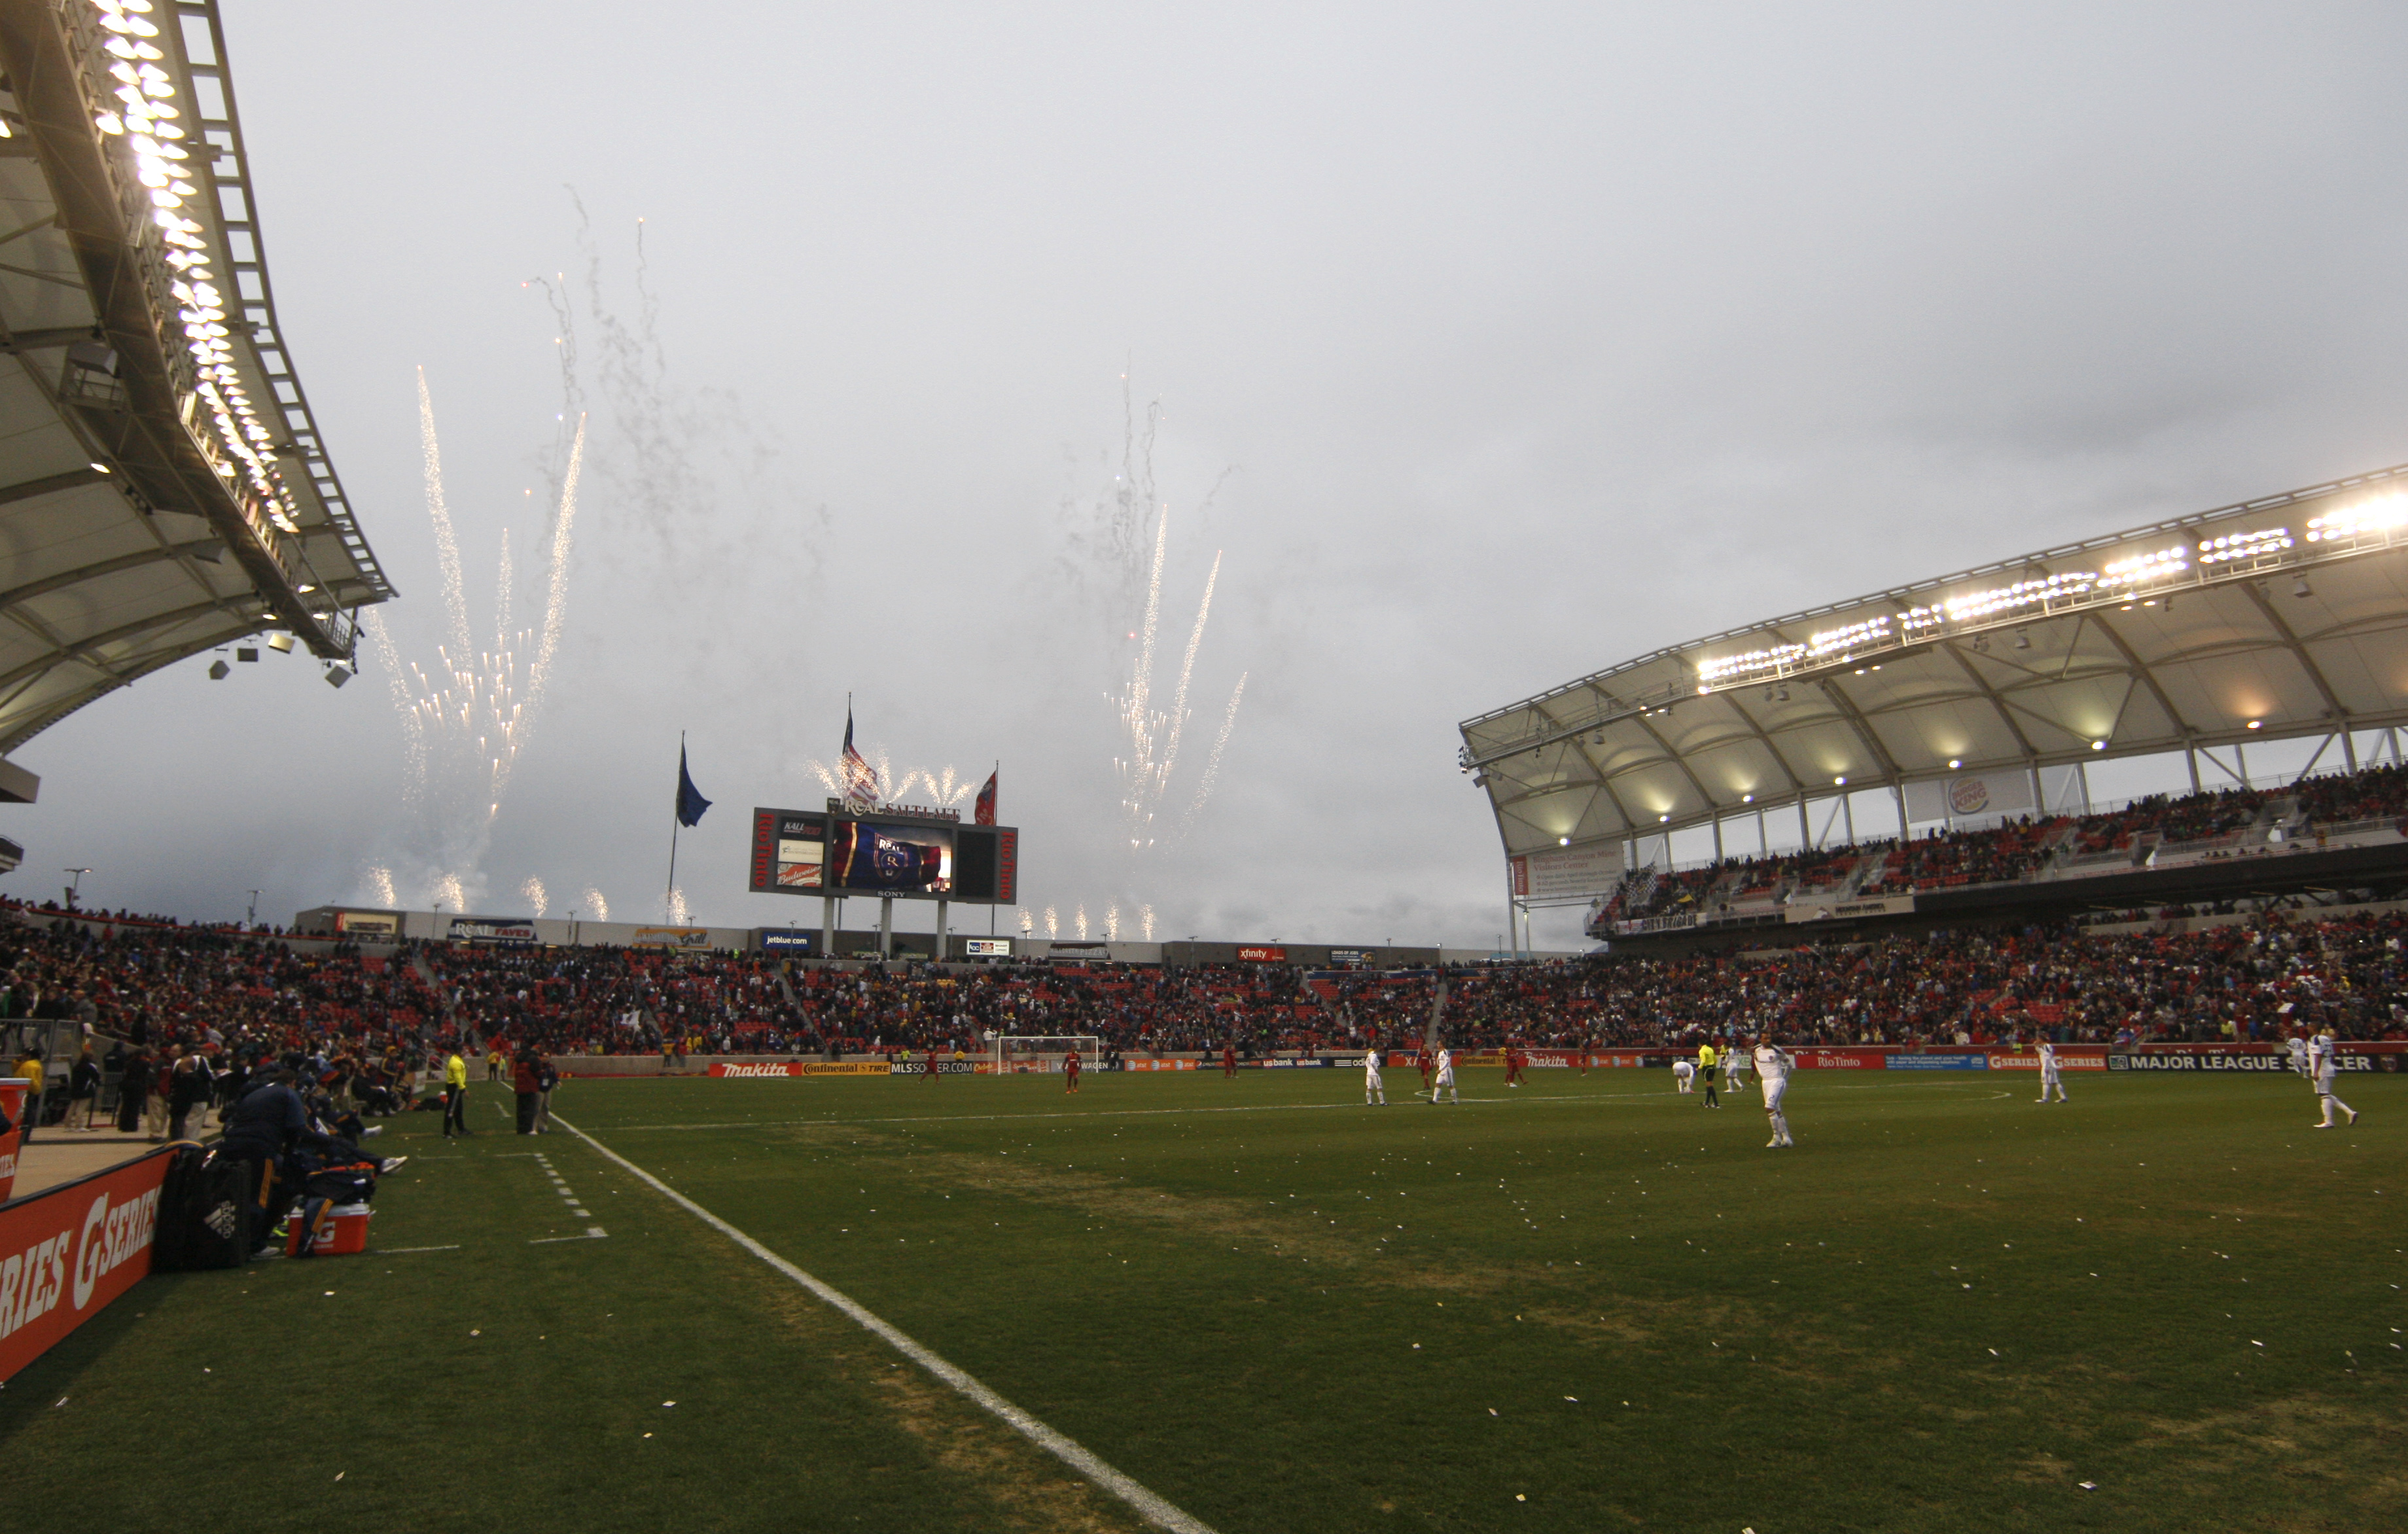 SANDY, UT - MARCH 26: Fireworks go off before a sold-out crowd of 20,000 at a game against Real Salt Lake and the Los Angeles Galaxy at an MLS soccer game March 26, 2011 at Rio Tinto Stadium in Sandy, Utah. (Photo by George Frey/Getty Images)